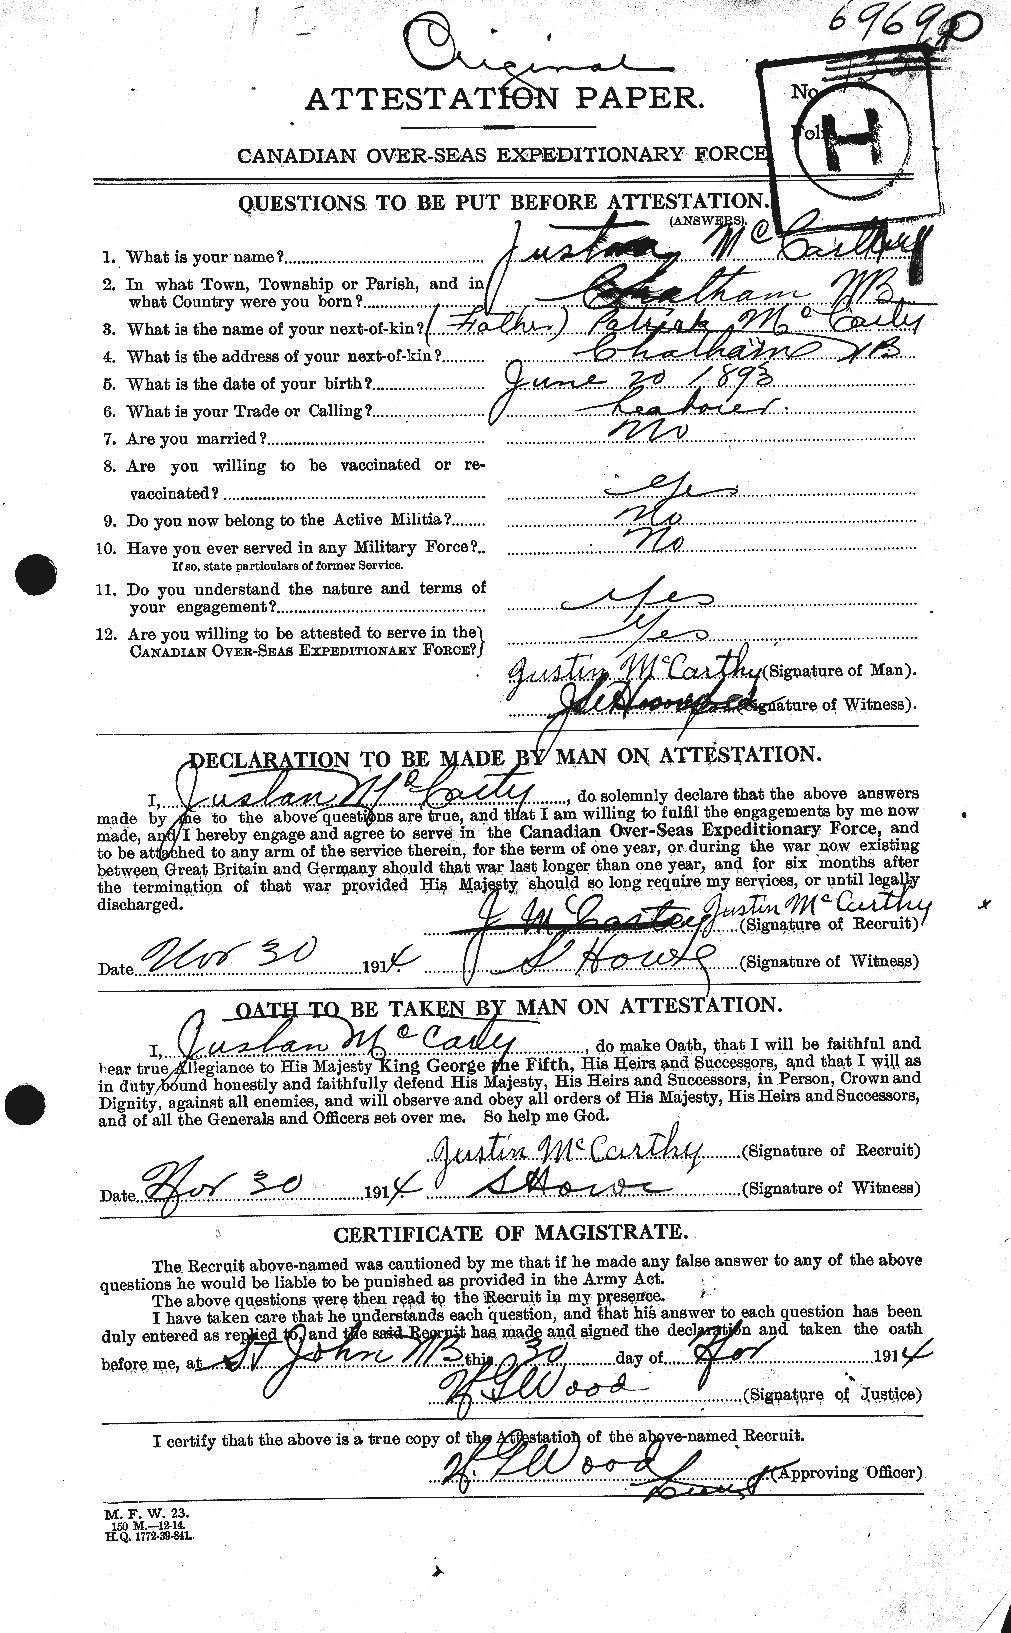 Personnel Records of the First World War - CEF 133905a